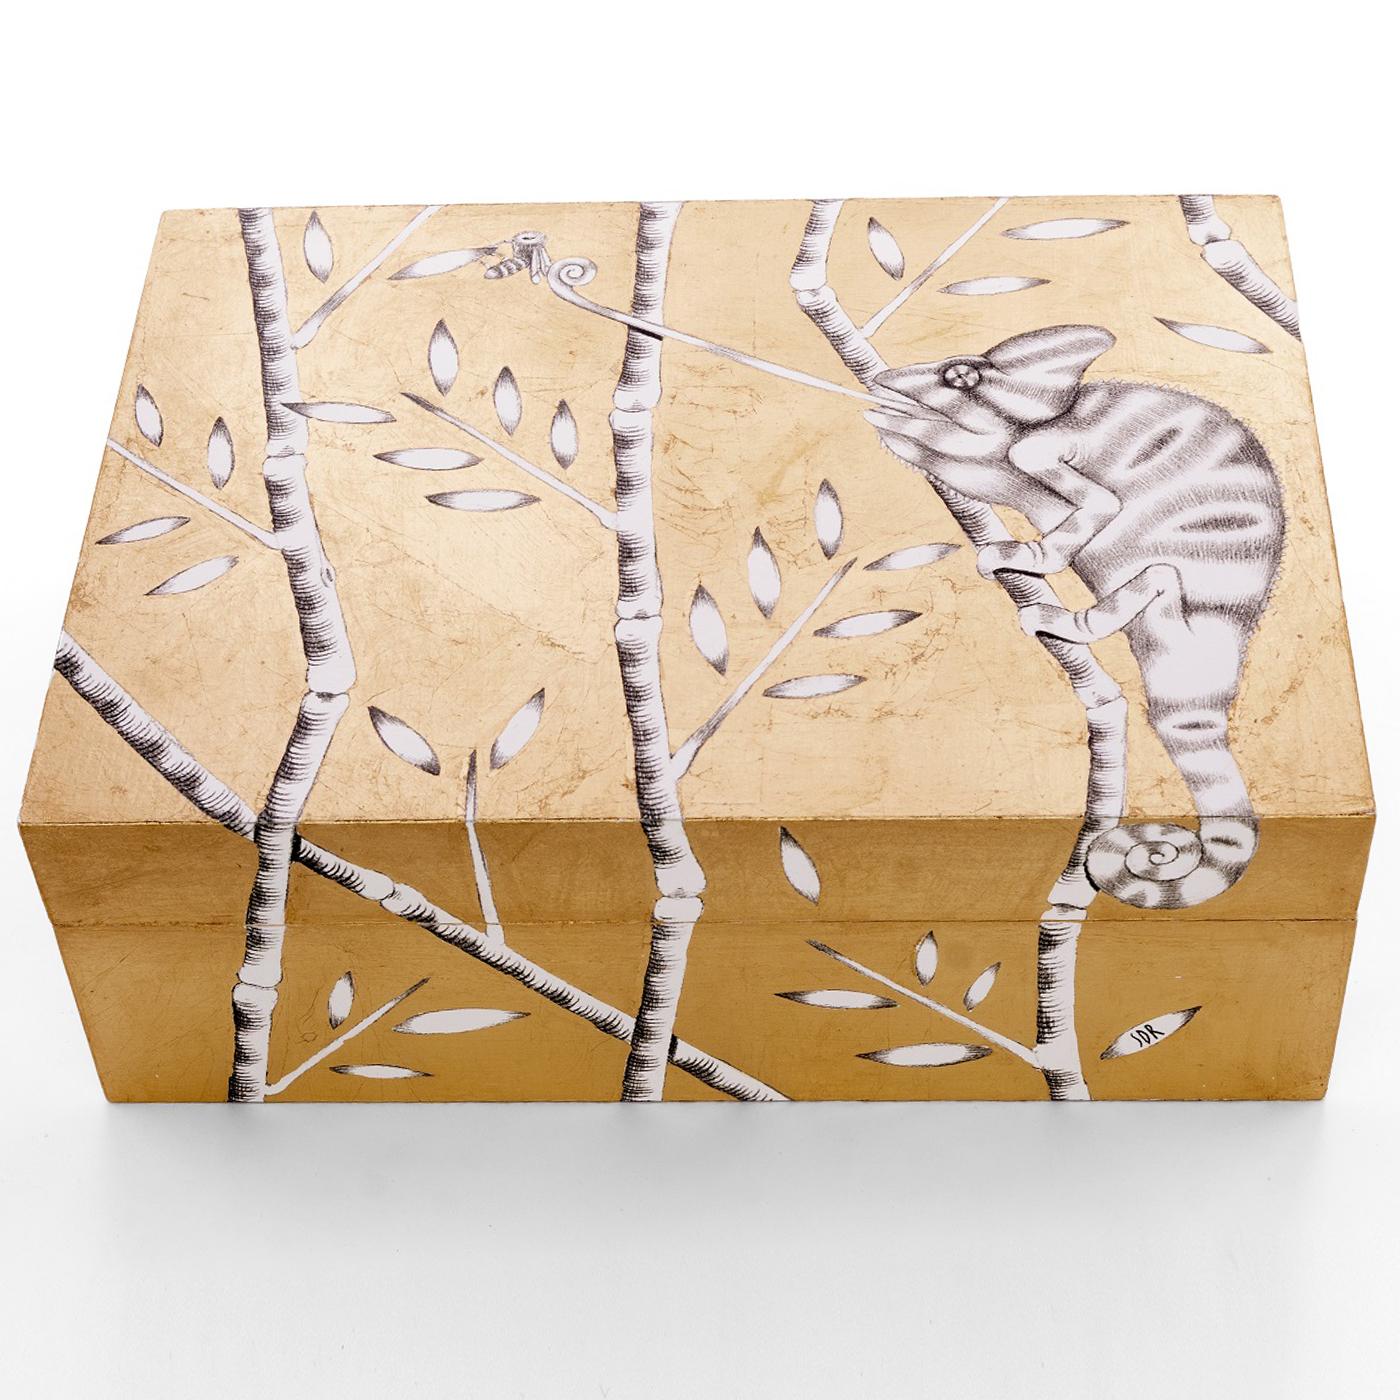 Hand-made box with gold leaf application on graphite drawing. A chameleon climbs up from the paper to the branches around the wooden box. Entirely decorated by hand with gold leaf on the print of an original graphite drawing. Finished with shellac.